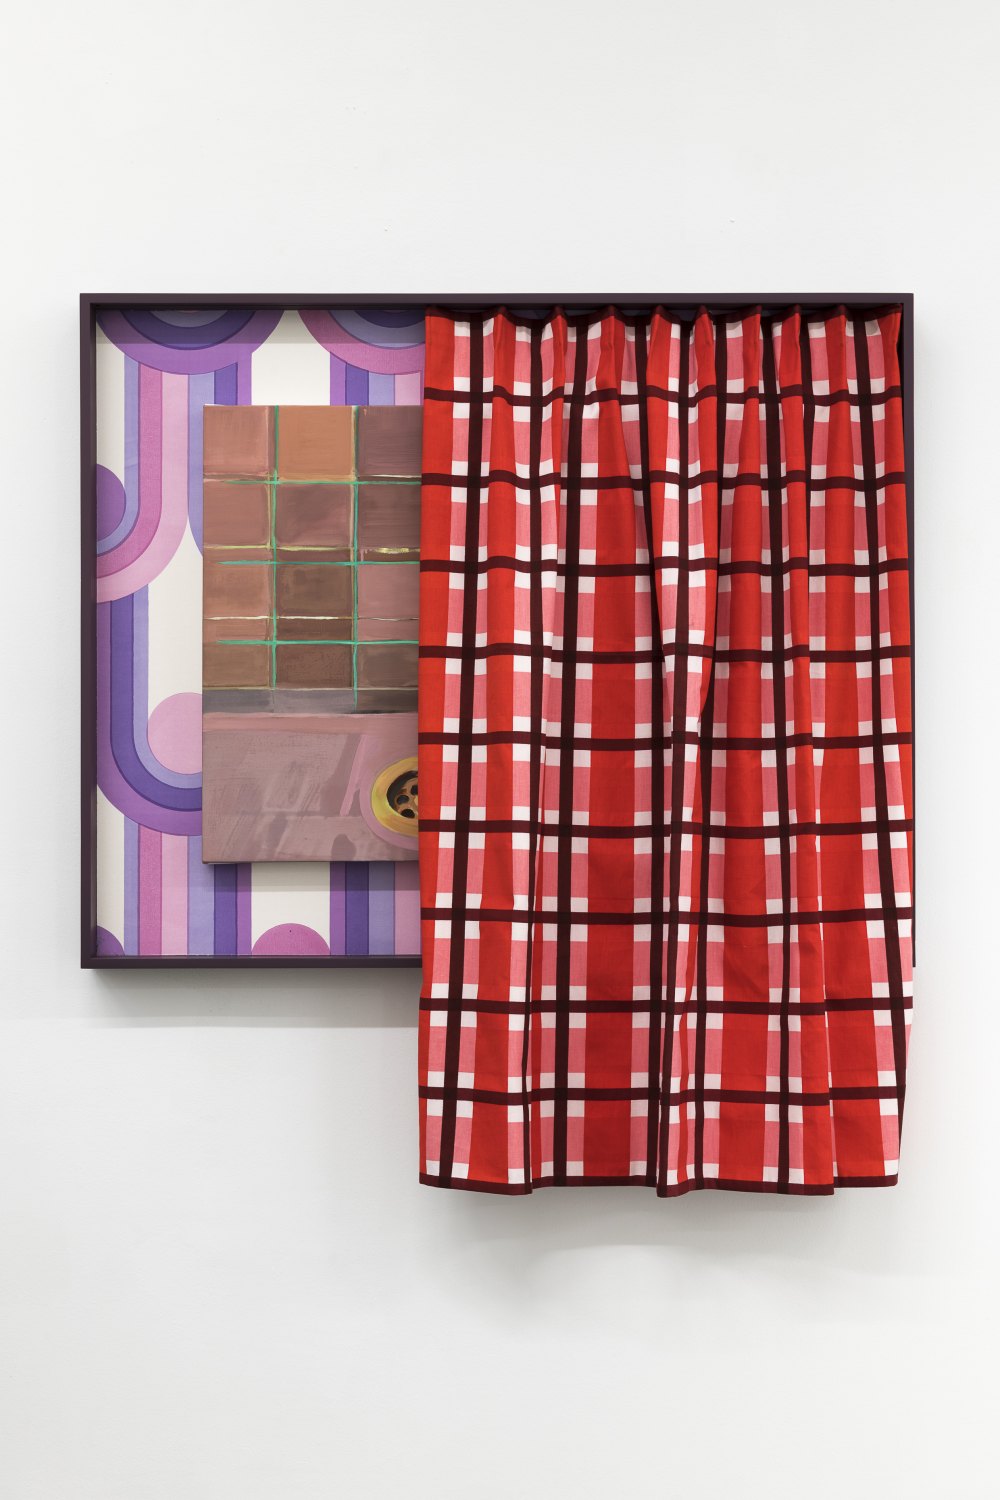 Alex Hubbard  Nocturnal Parameters, 2018 Oil on canvas, found wallpaper, wood, fabric, 86,5 x 107 x 7,5 cm 